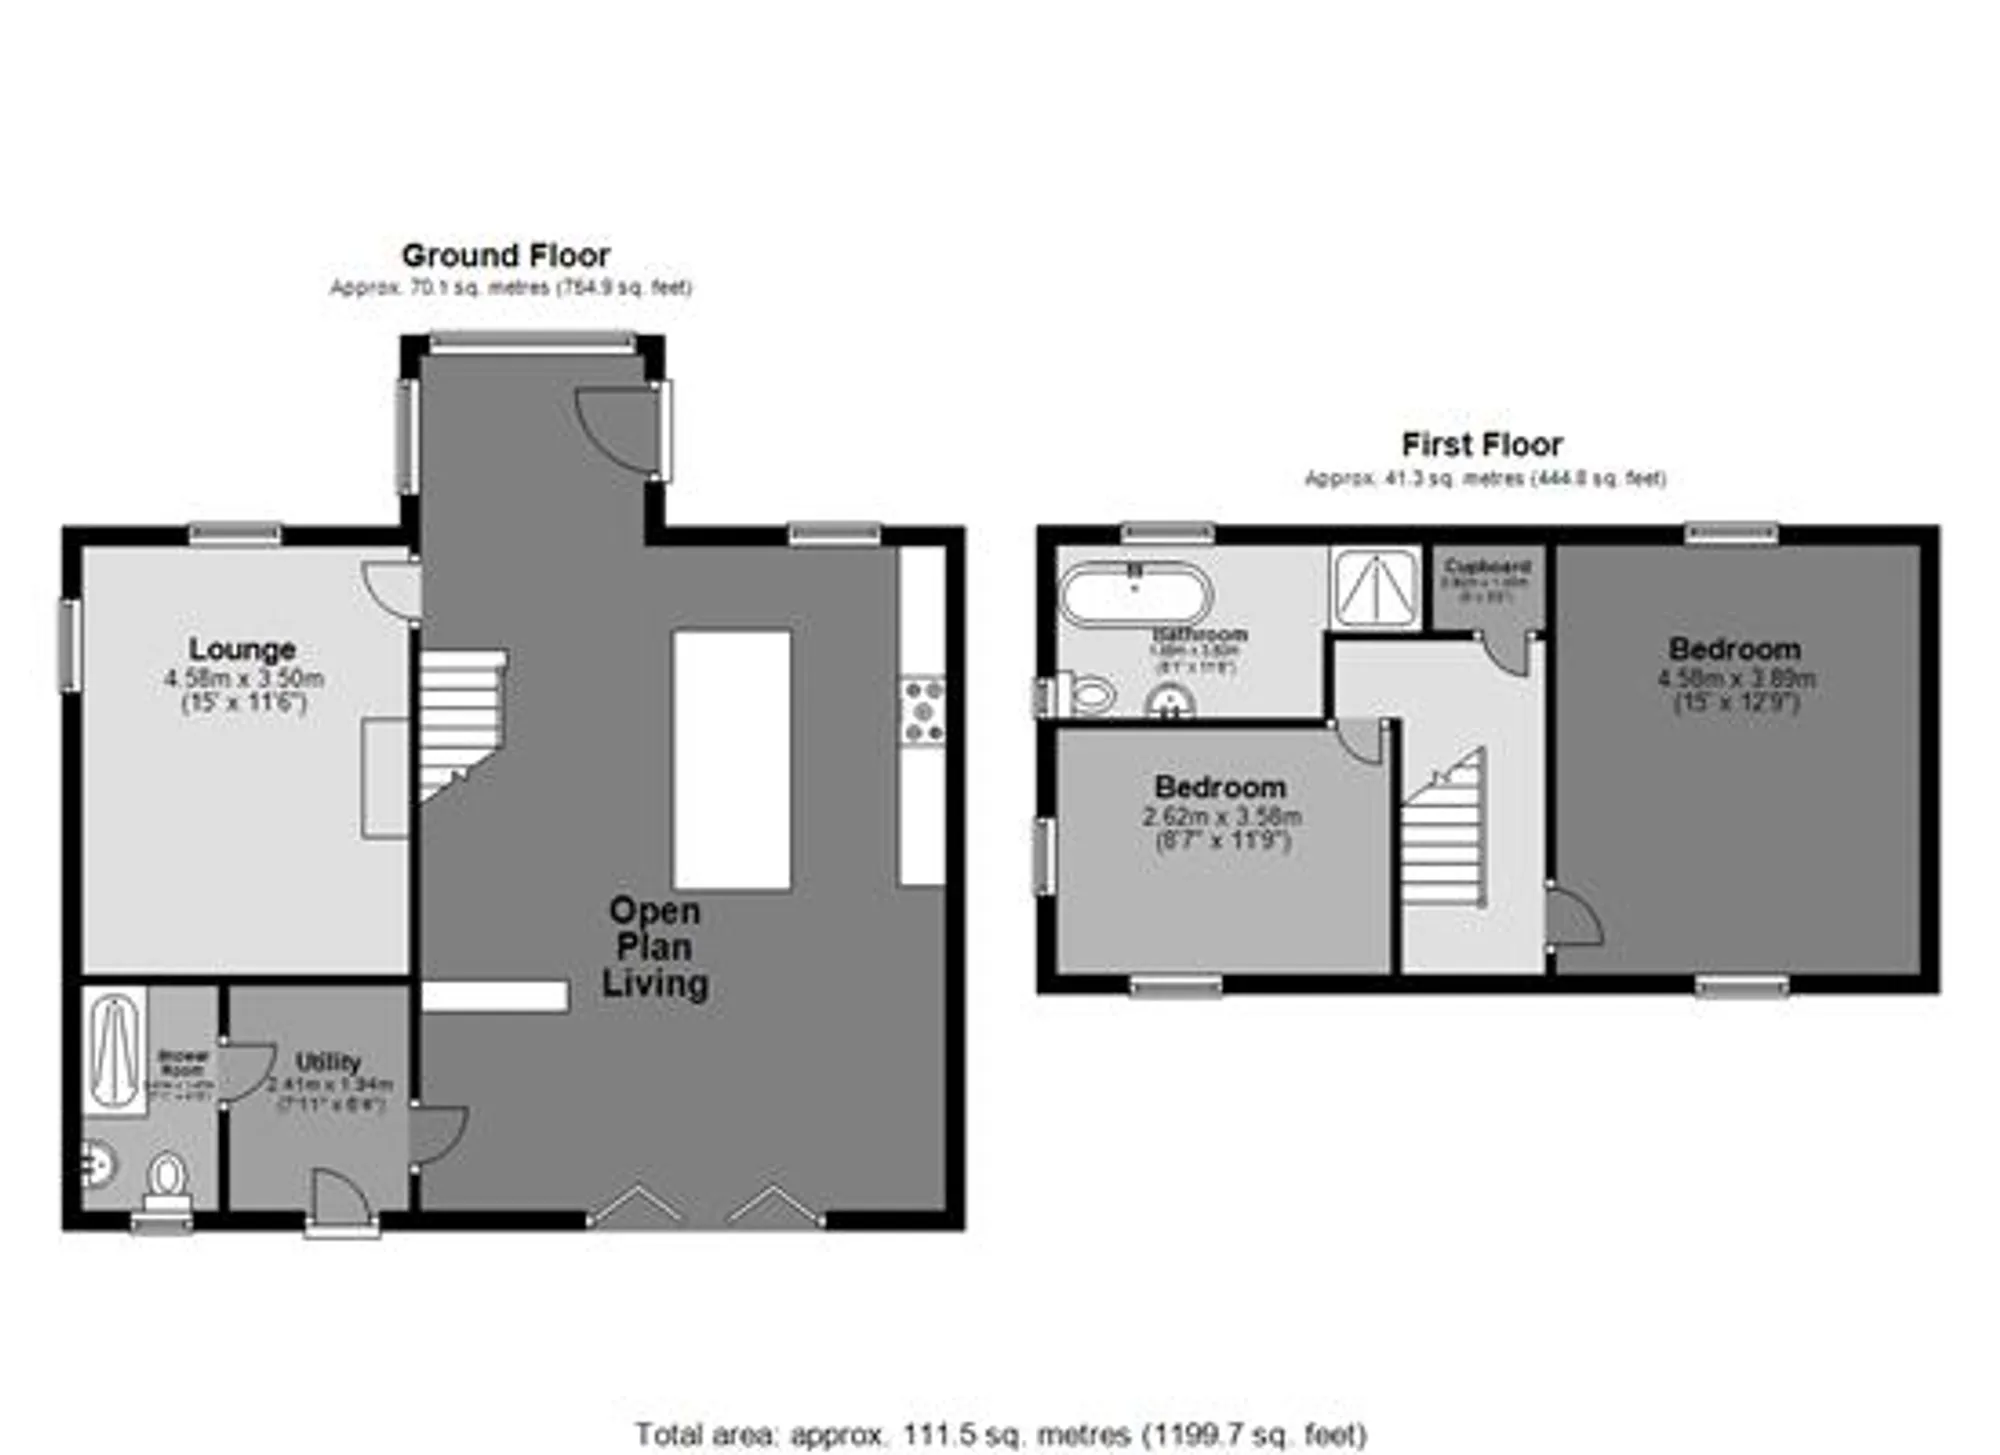 2 bed detached house for sale in Tedburn St Mary, Exeter - Property floorplan